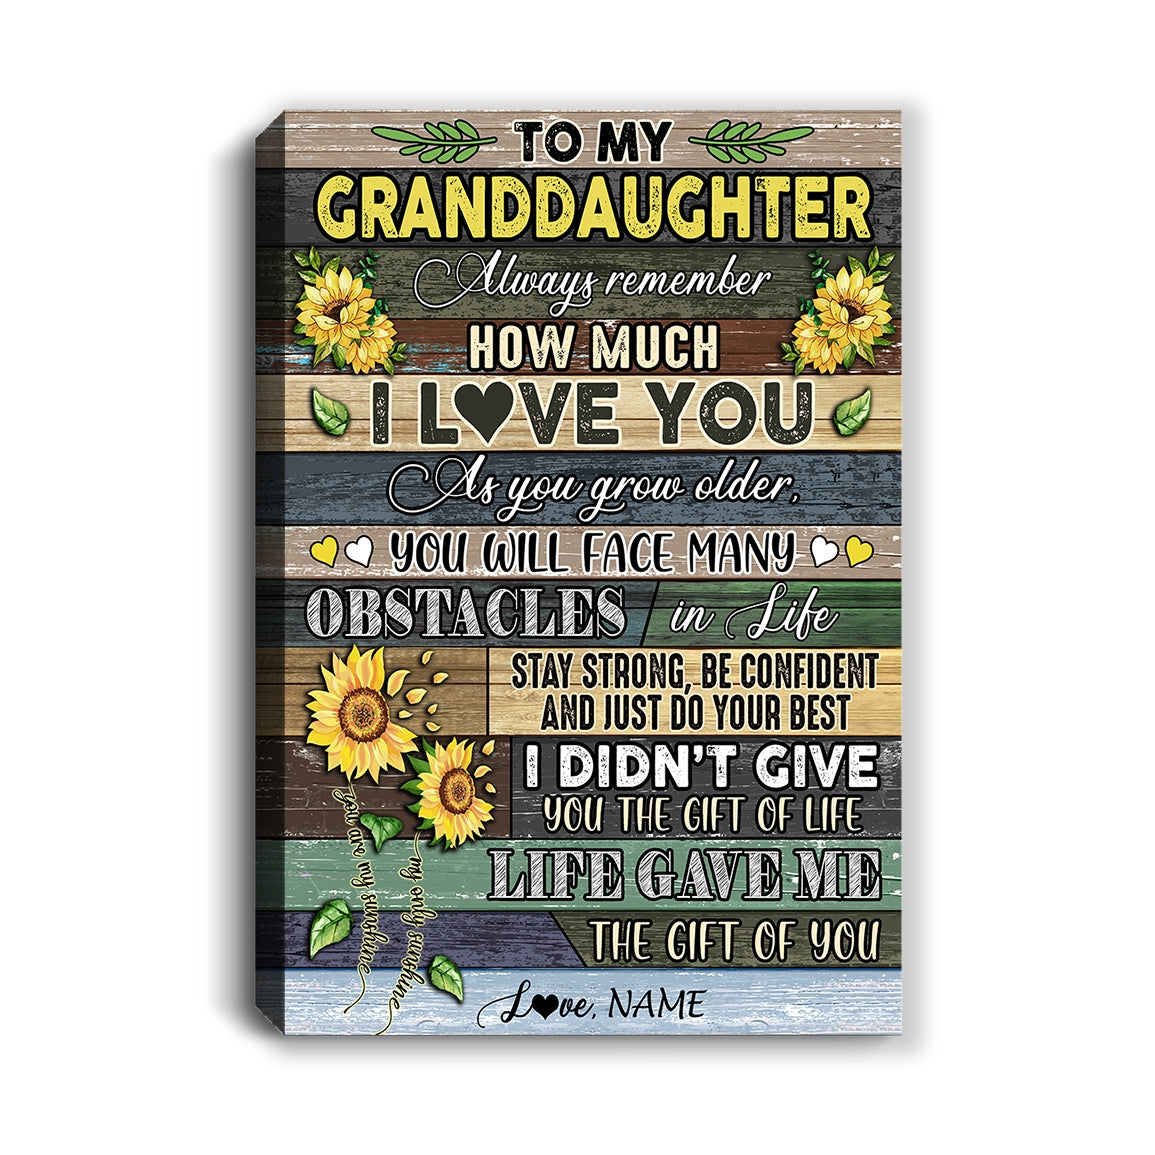 Personalized_To_My_Granddaughter_Canvas_From_Grandma_Nana_Always_Remember_How_Much_I_Love_You_Wood_Sunflower_Granddaughter_Birthday_Custom_Wall_Art_Print_Home_Decor_Framed_Canvas_Canv-1.jpg